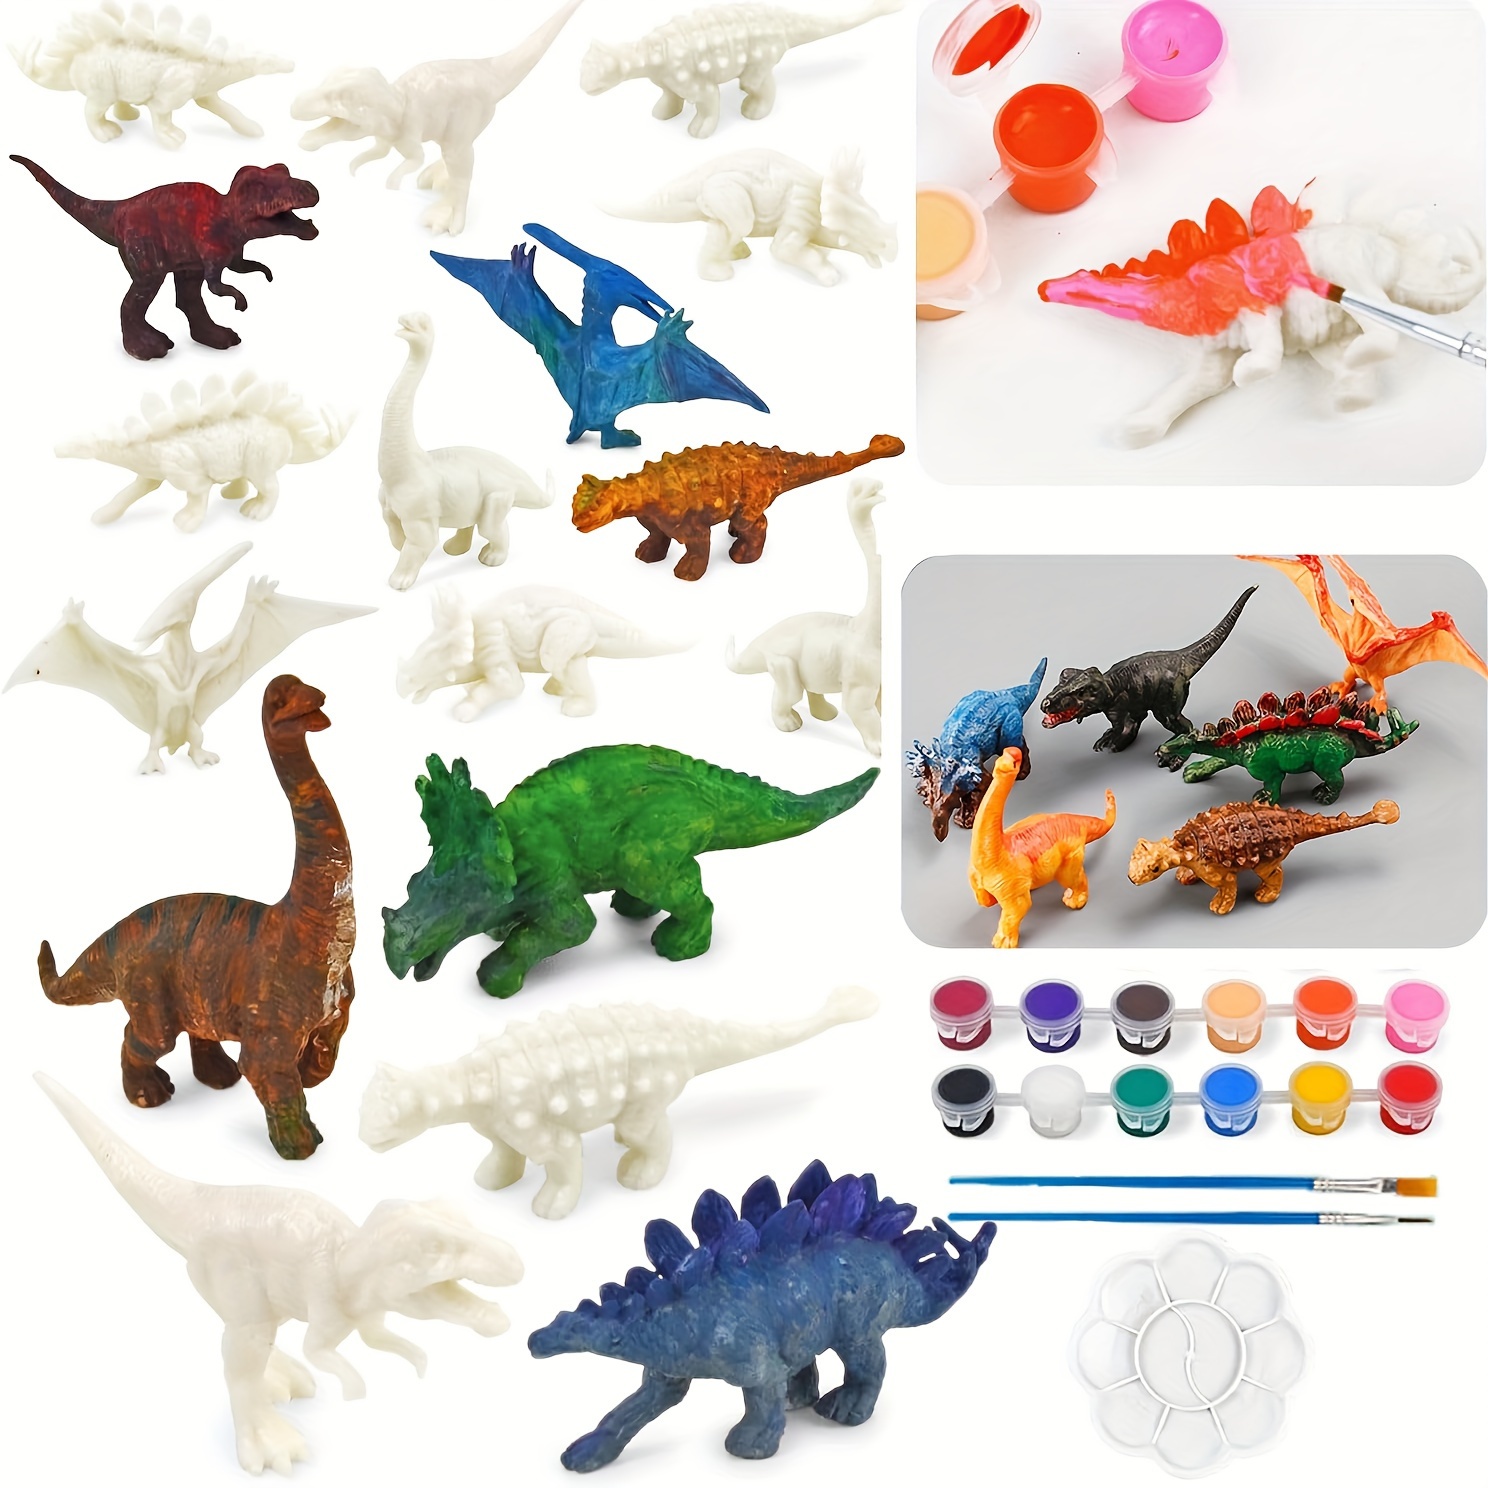 

Dinosaur Painting Kit For Kids - 11pcs Set Includes 6 Diy Dinosaurs, 2 Brushes, Palette, 12 Non-toxic Paints - And Crafts Activity - Suitable For Ages 8 To 14 - Creative Party Favors And Gifts